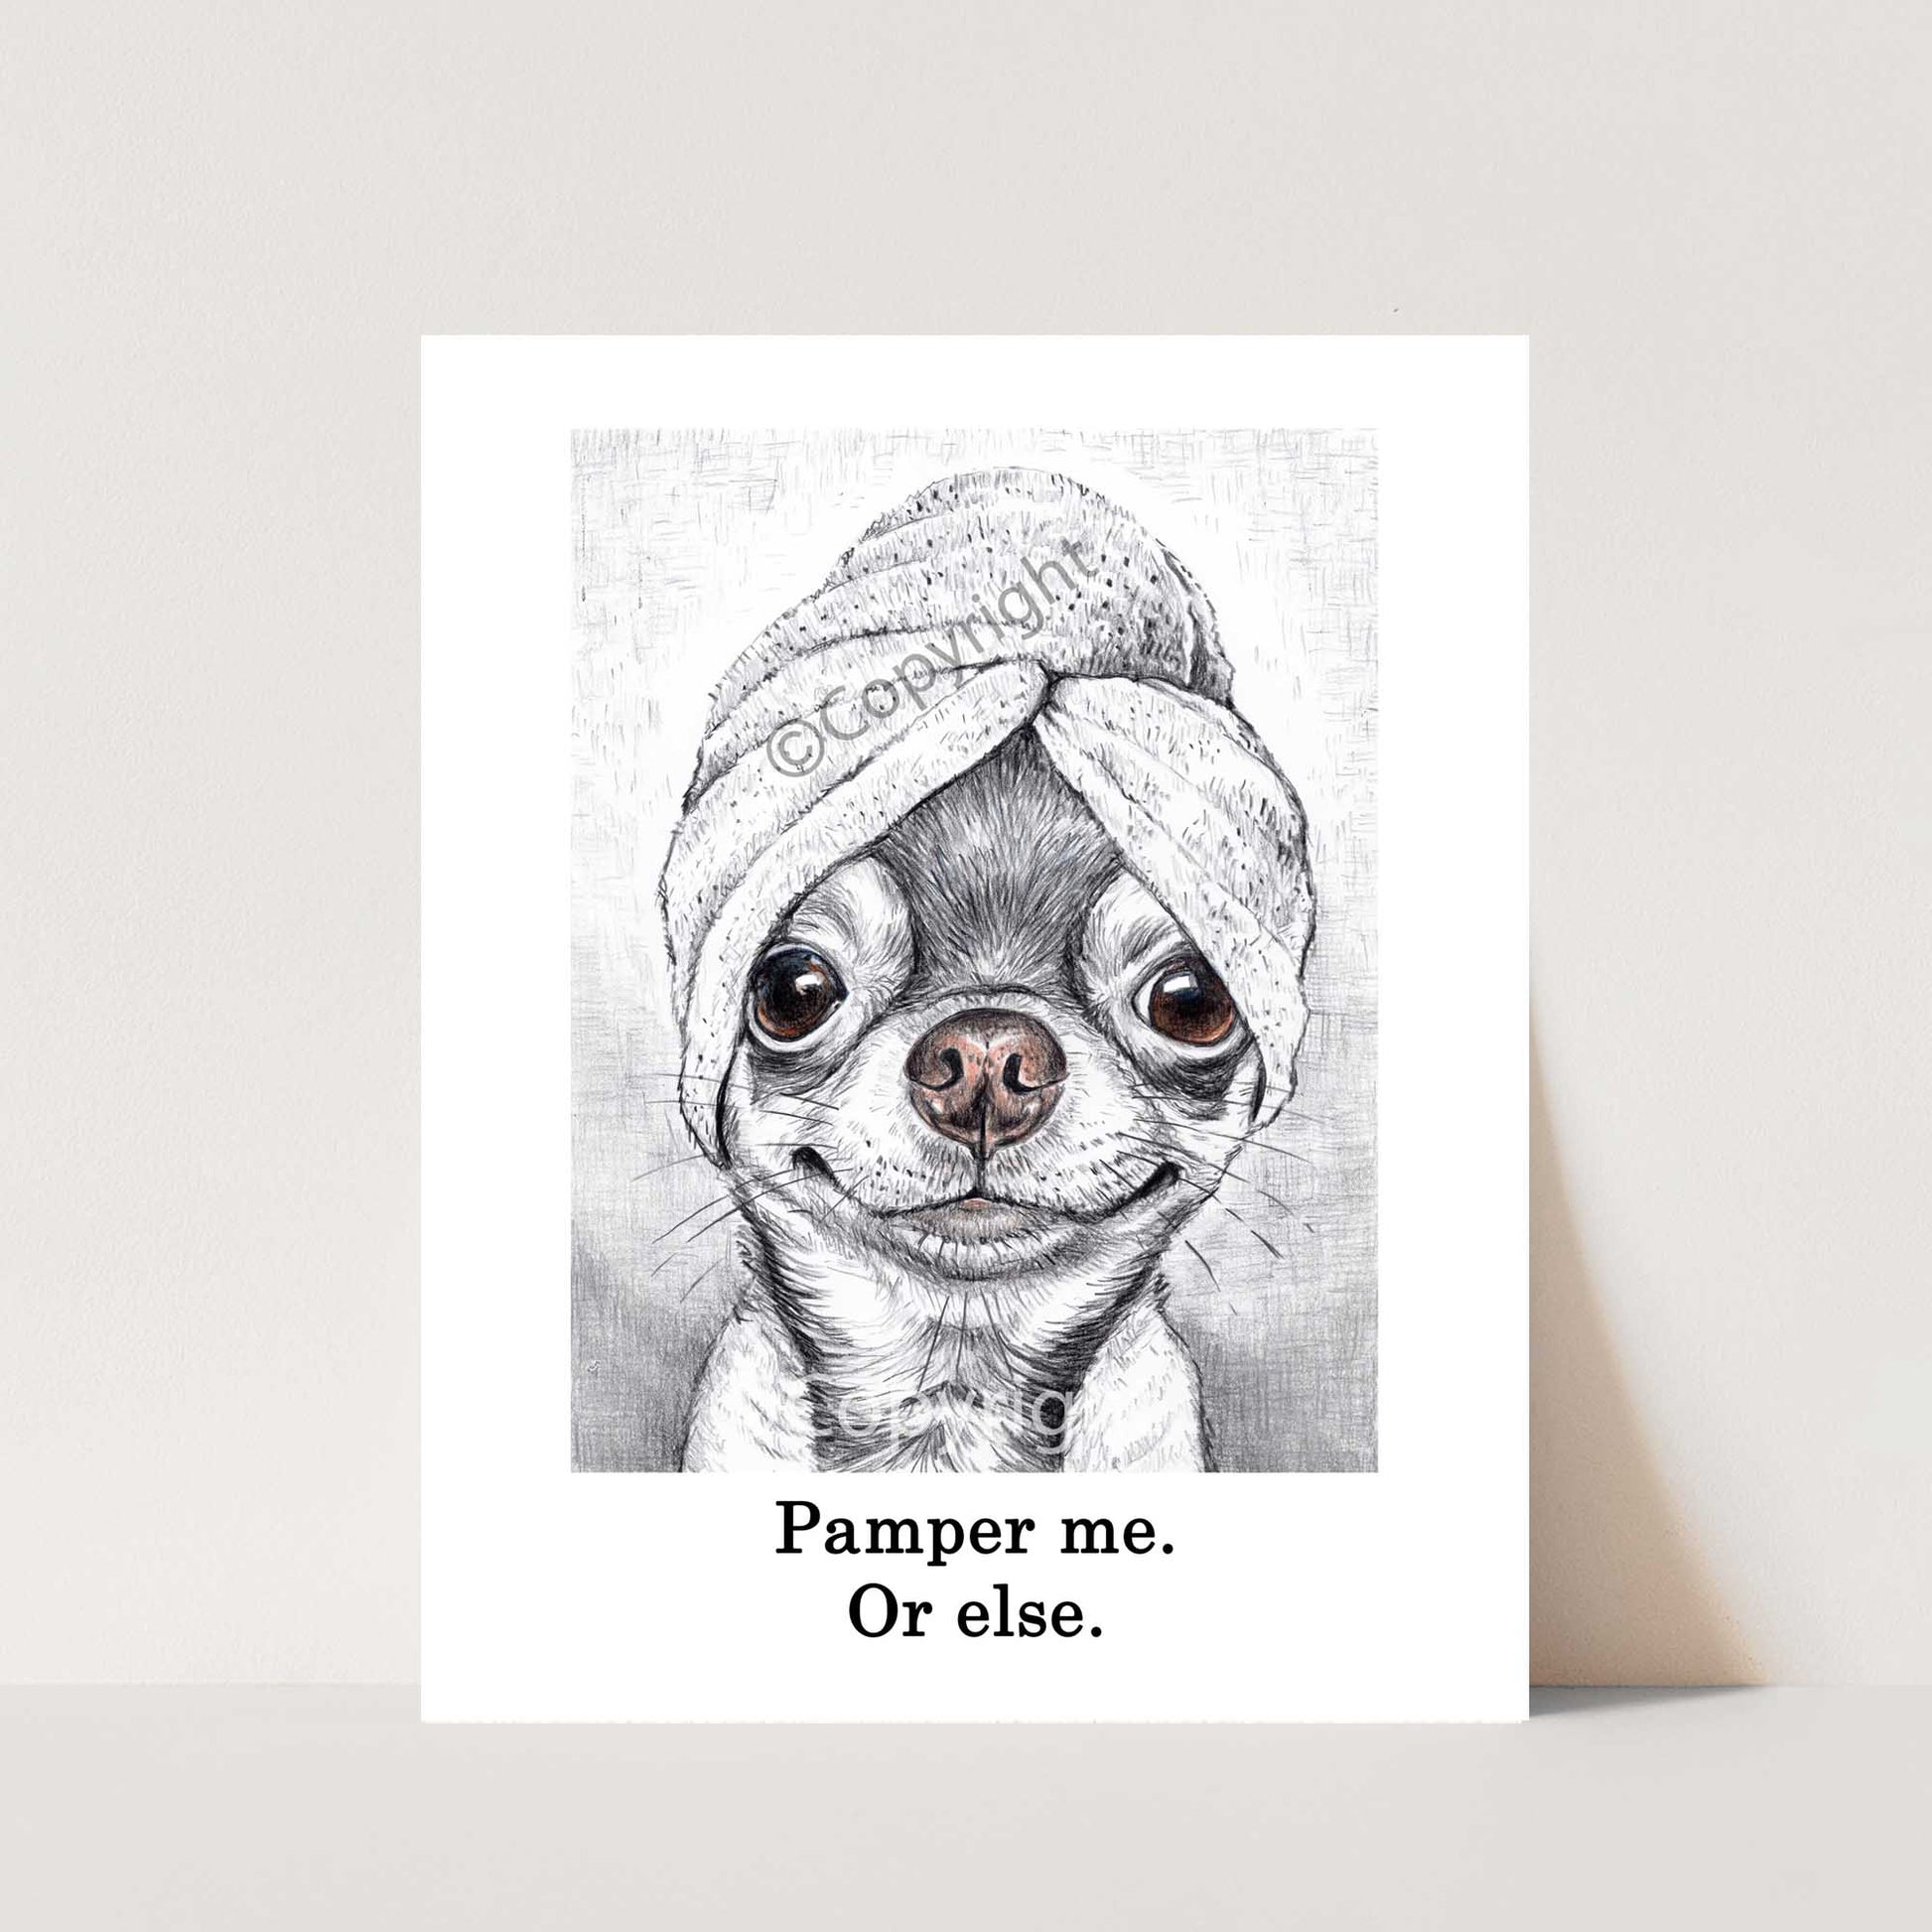 Crayon drawing of an adorable chihuahua dog wearing a bath towel on it's head. Art by Deidre Wicks